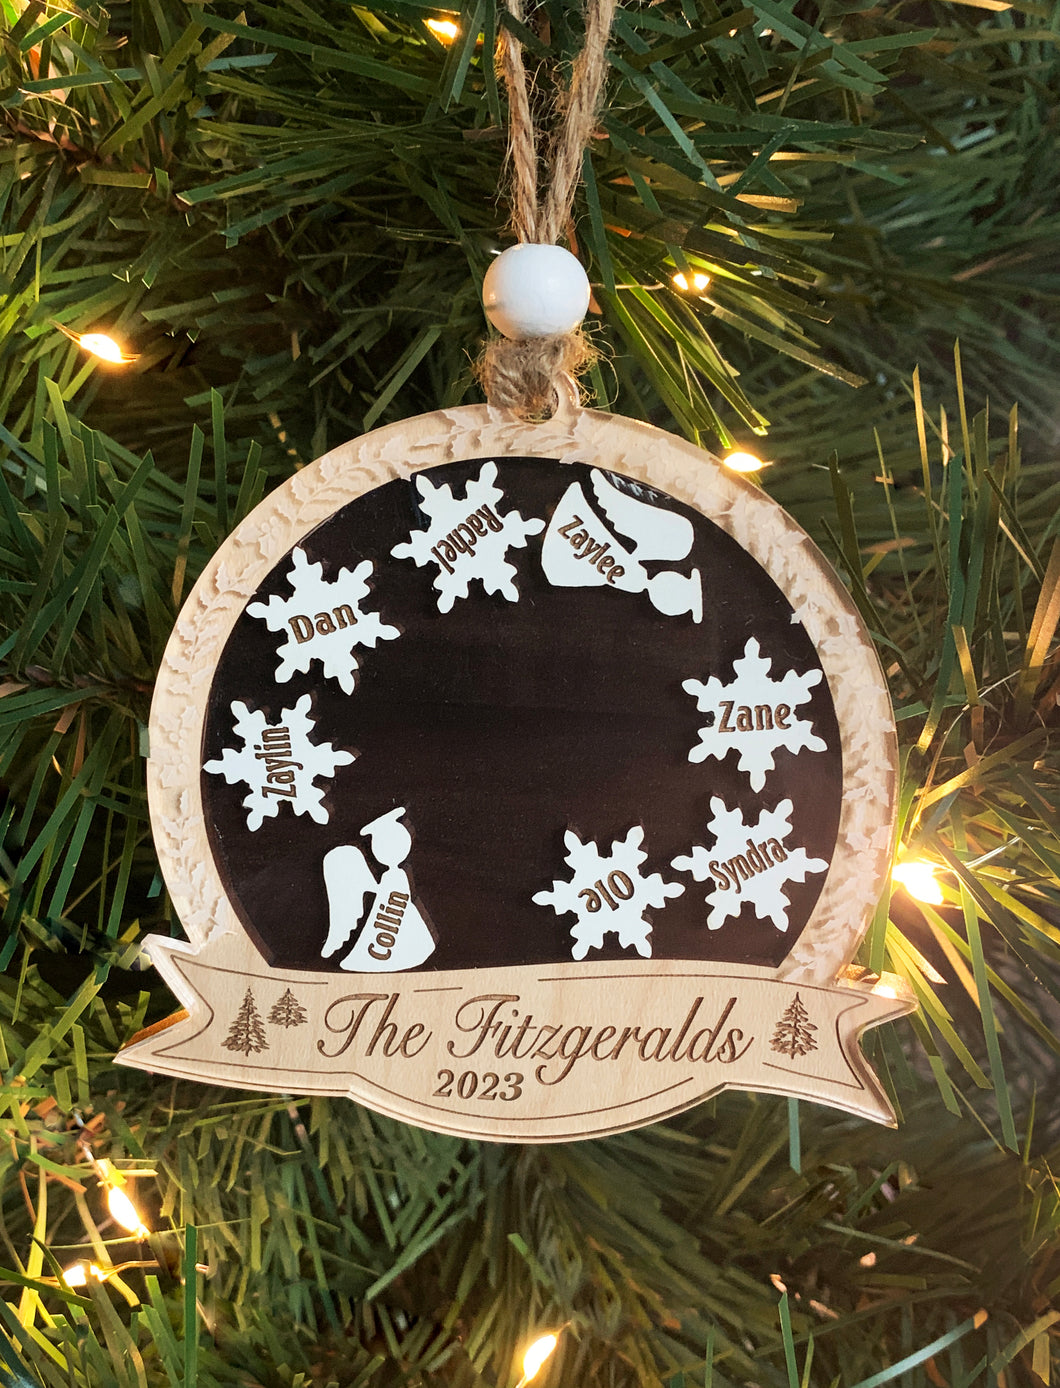 Holiday Snow Globe Personalized Family Names Ornament Remembering Angels Memorial Gift by Weathered Raindrop